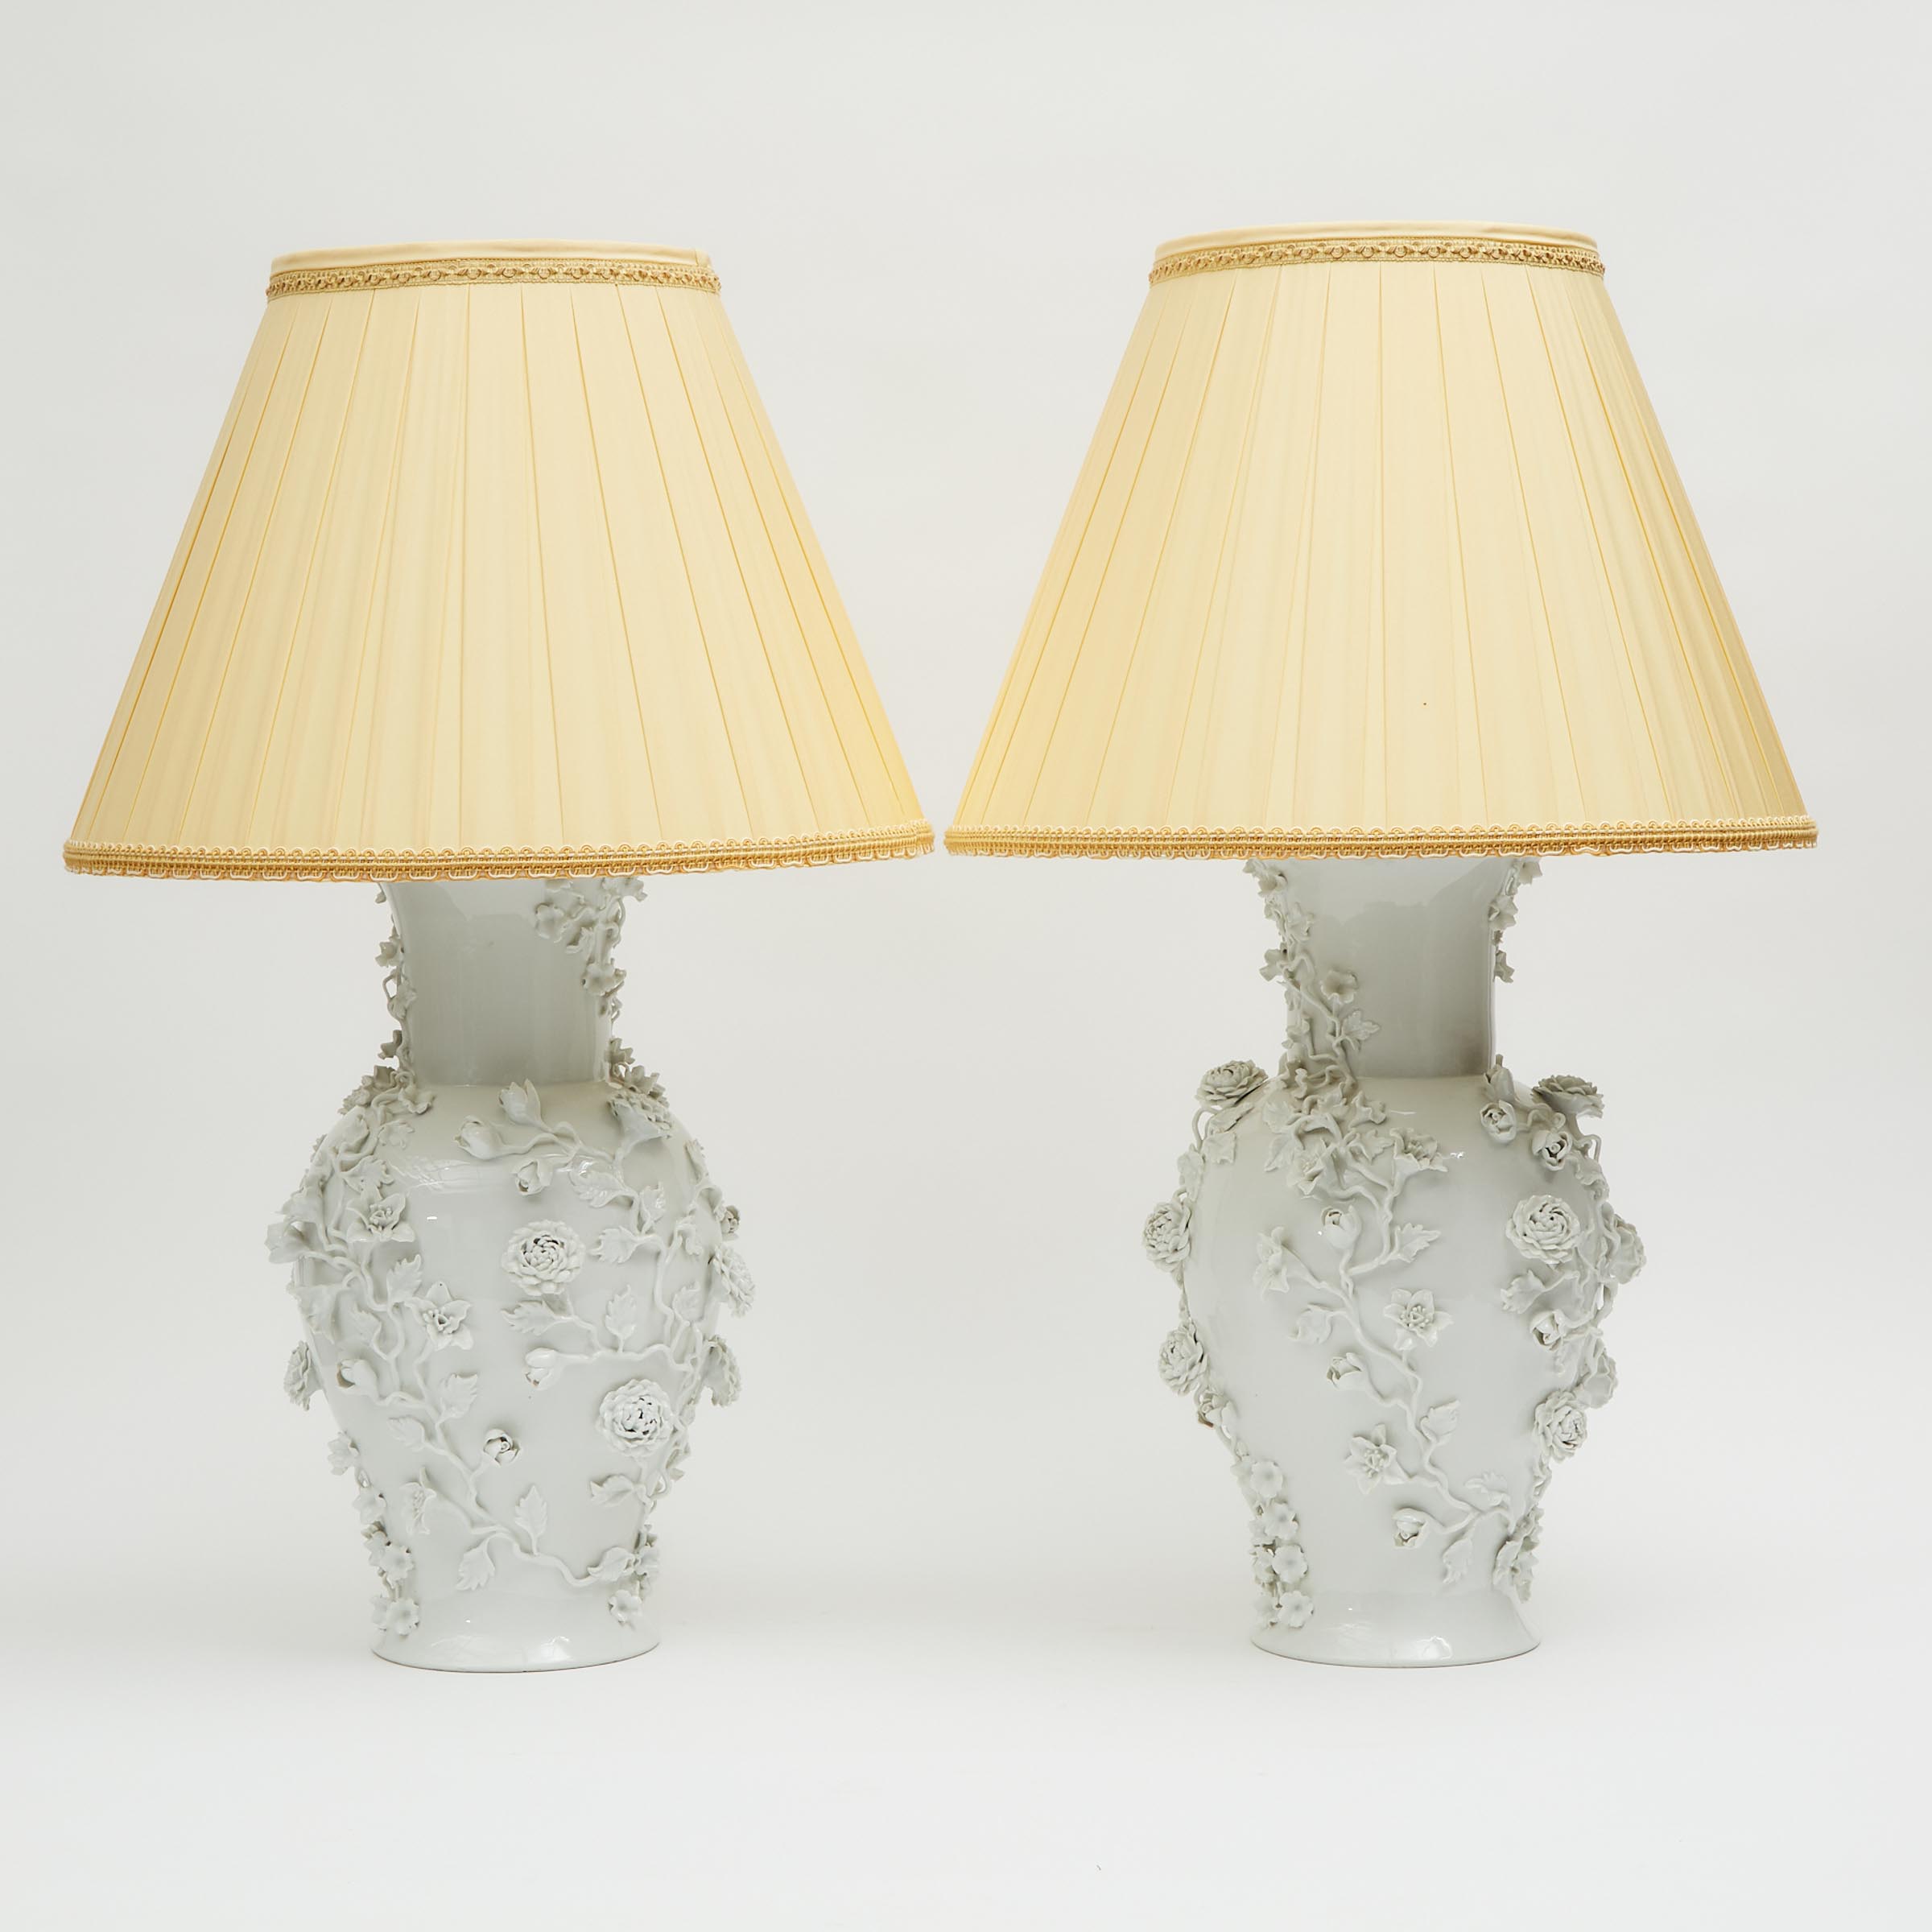 A Pair of Blanc de Chine Style Vase Lamps, 20th Century